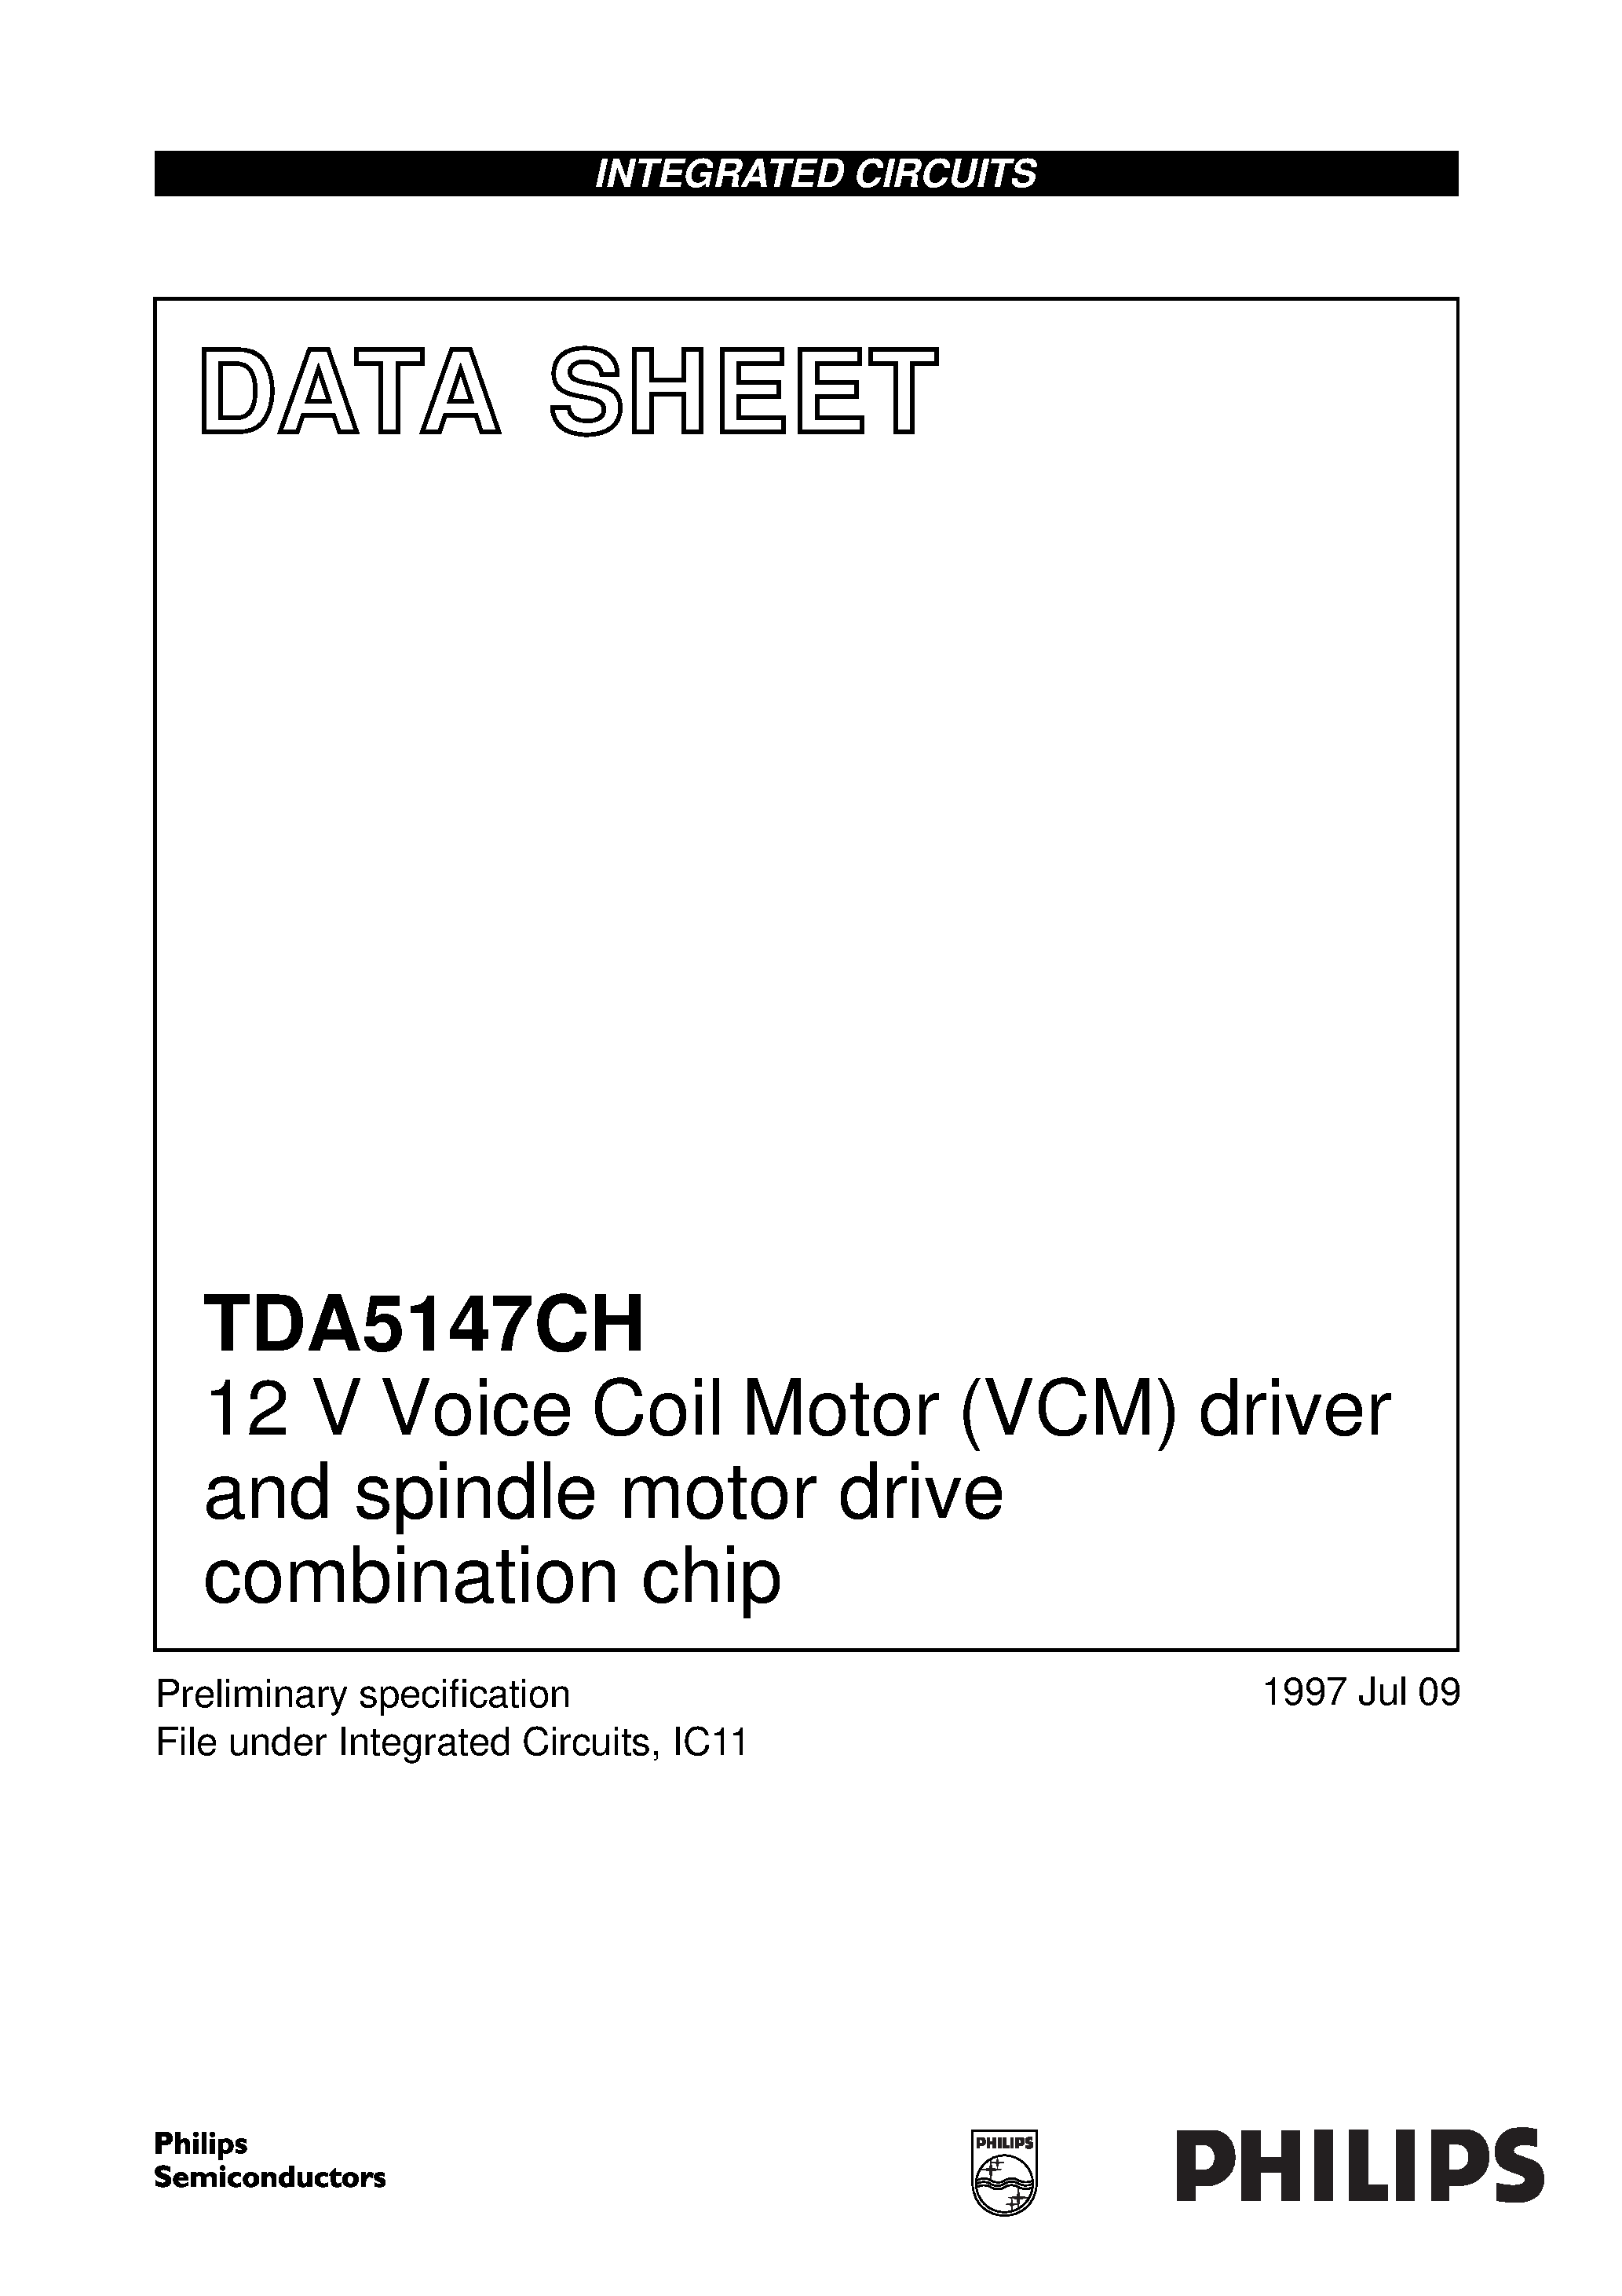 Datasheet TDA5147CH - 12 V Voice Coil Motor VCM driver and spindle motor drive combination chip page 1